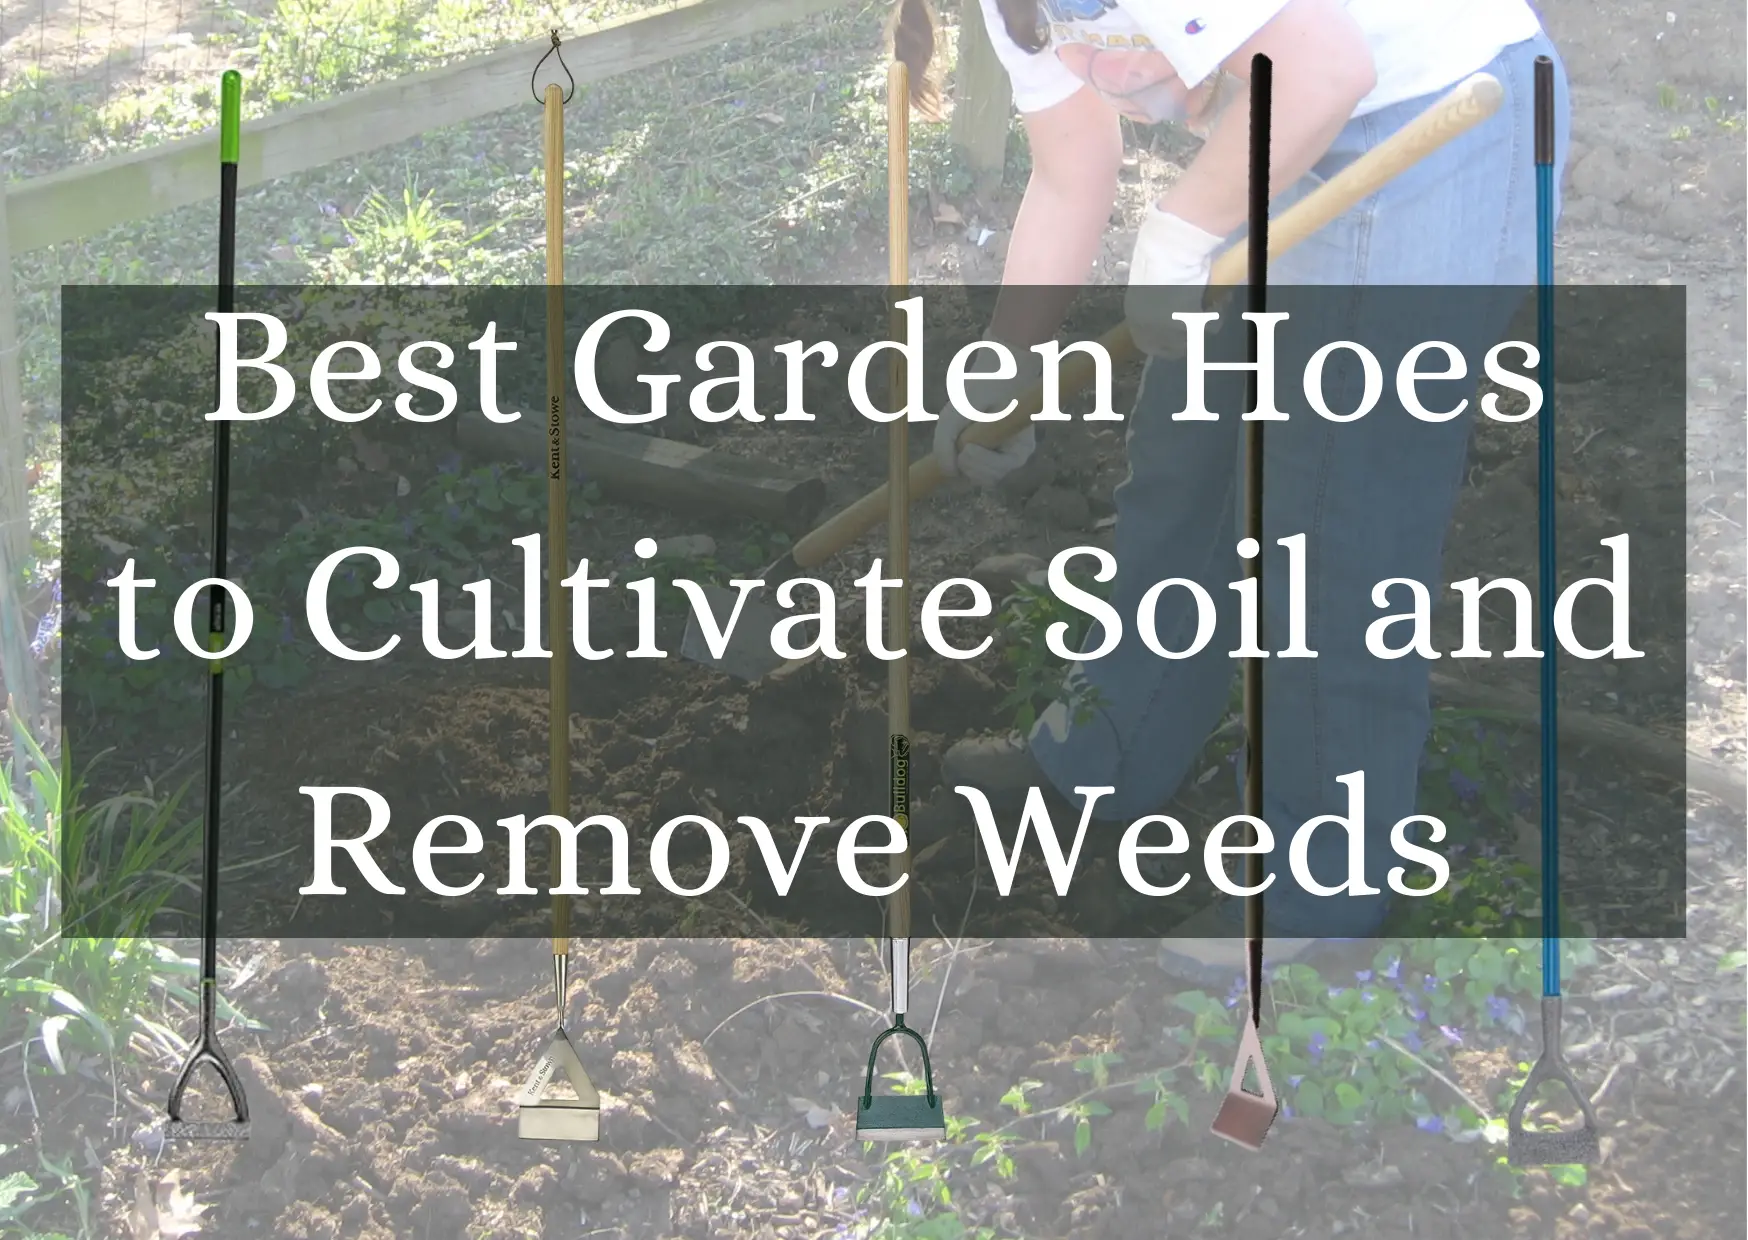 Best Garden Hoes to Cultivate Soil